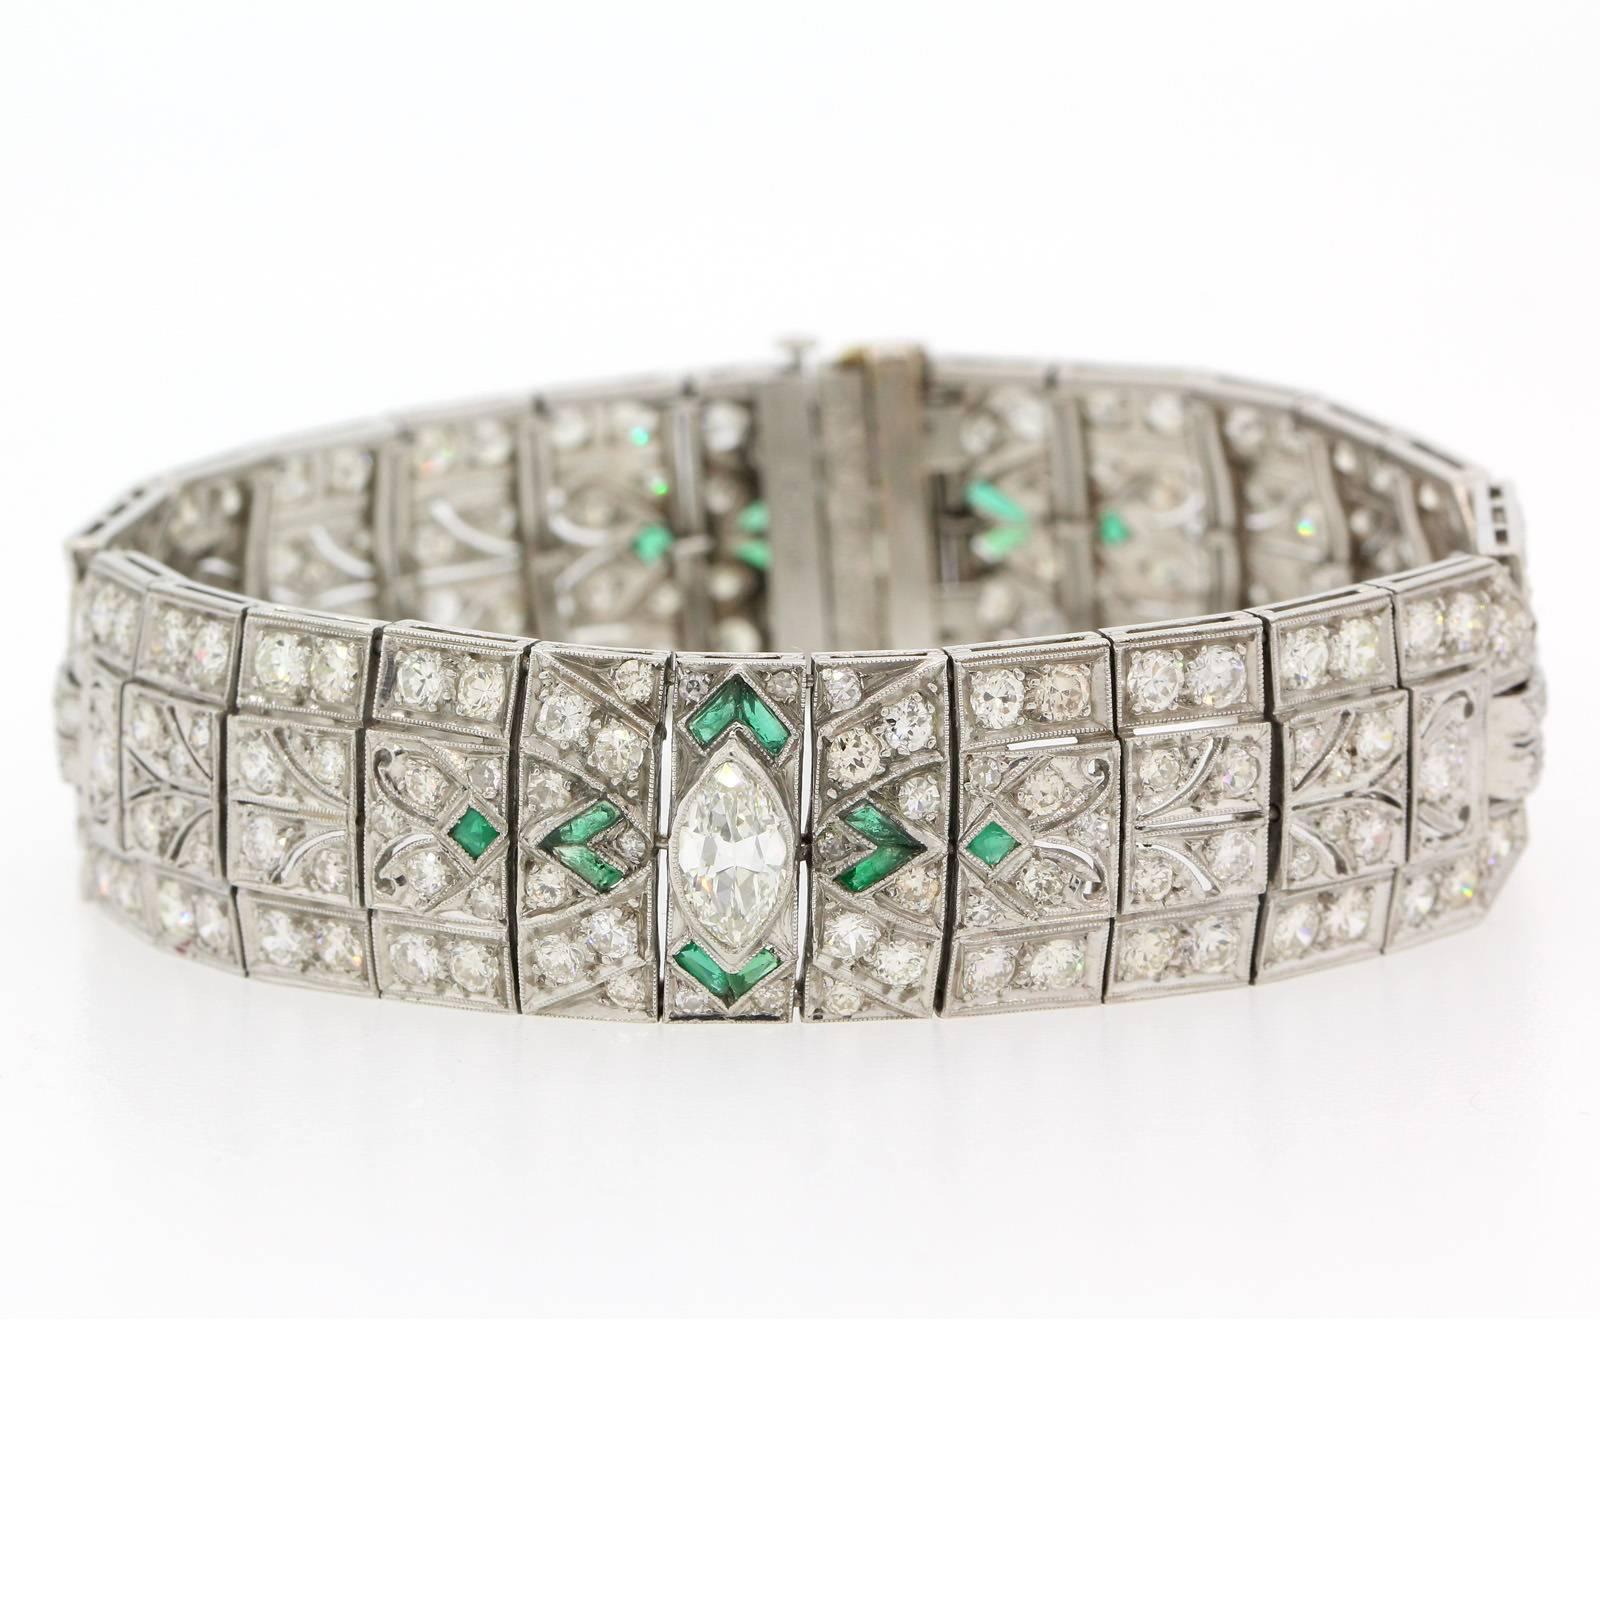 Impressively coveted Art Deco bracelet created in platinum and accented with two Marquise Cut Diamonds, one at the center and the second adorning the clasp.  This high quality bauble is accented with 12.50  carat of Old Cut Diamonds.  For a splash